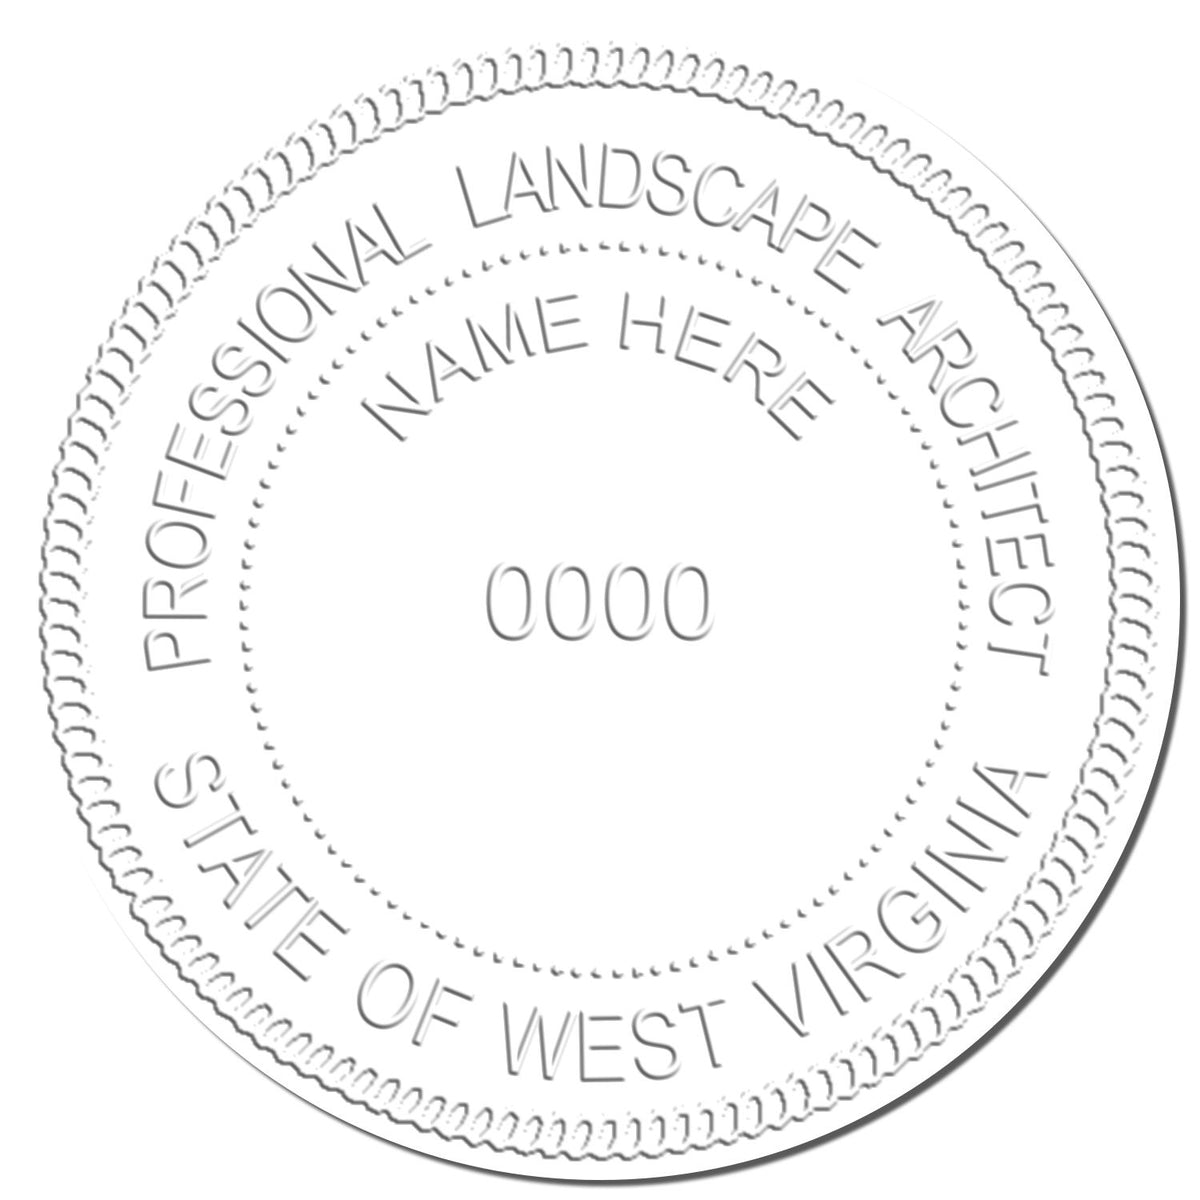 This paper is stamped with a sample imprint of the Gift West Virginia Landscape Architect Seal, signifying its quality and reliability.